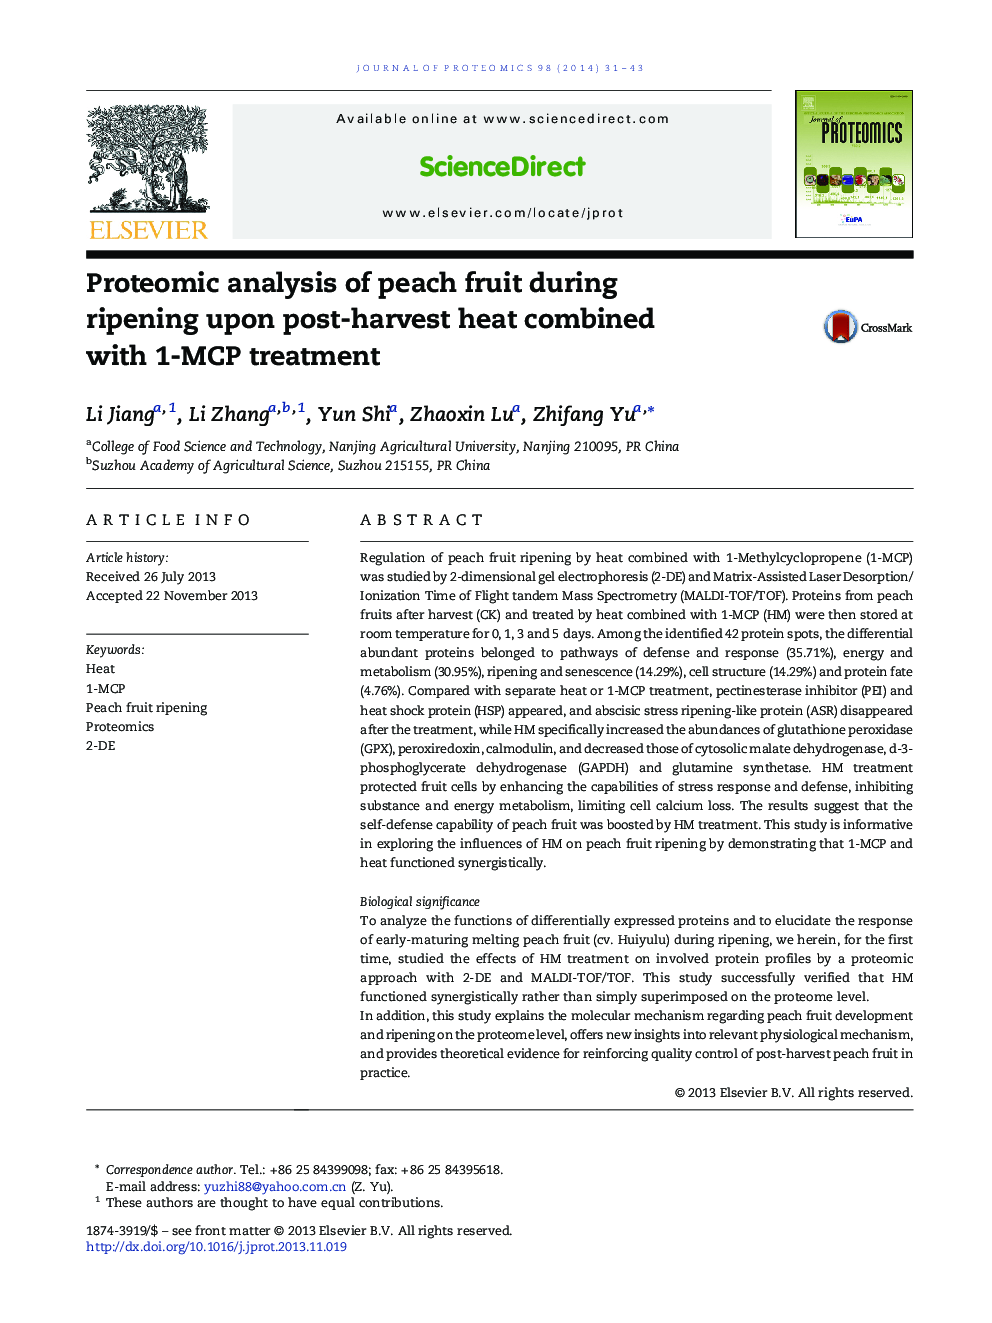 Proteomic analysis of peach fruit during ripening upon post-harvest heat combined with 1-MCP treatment